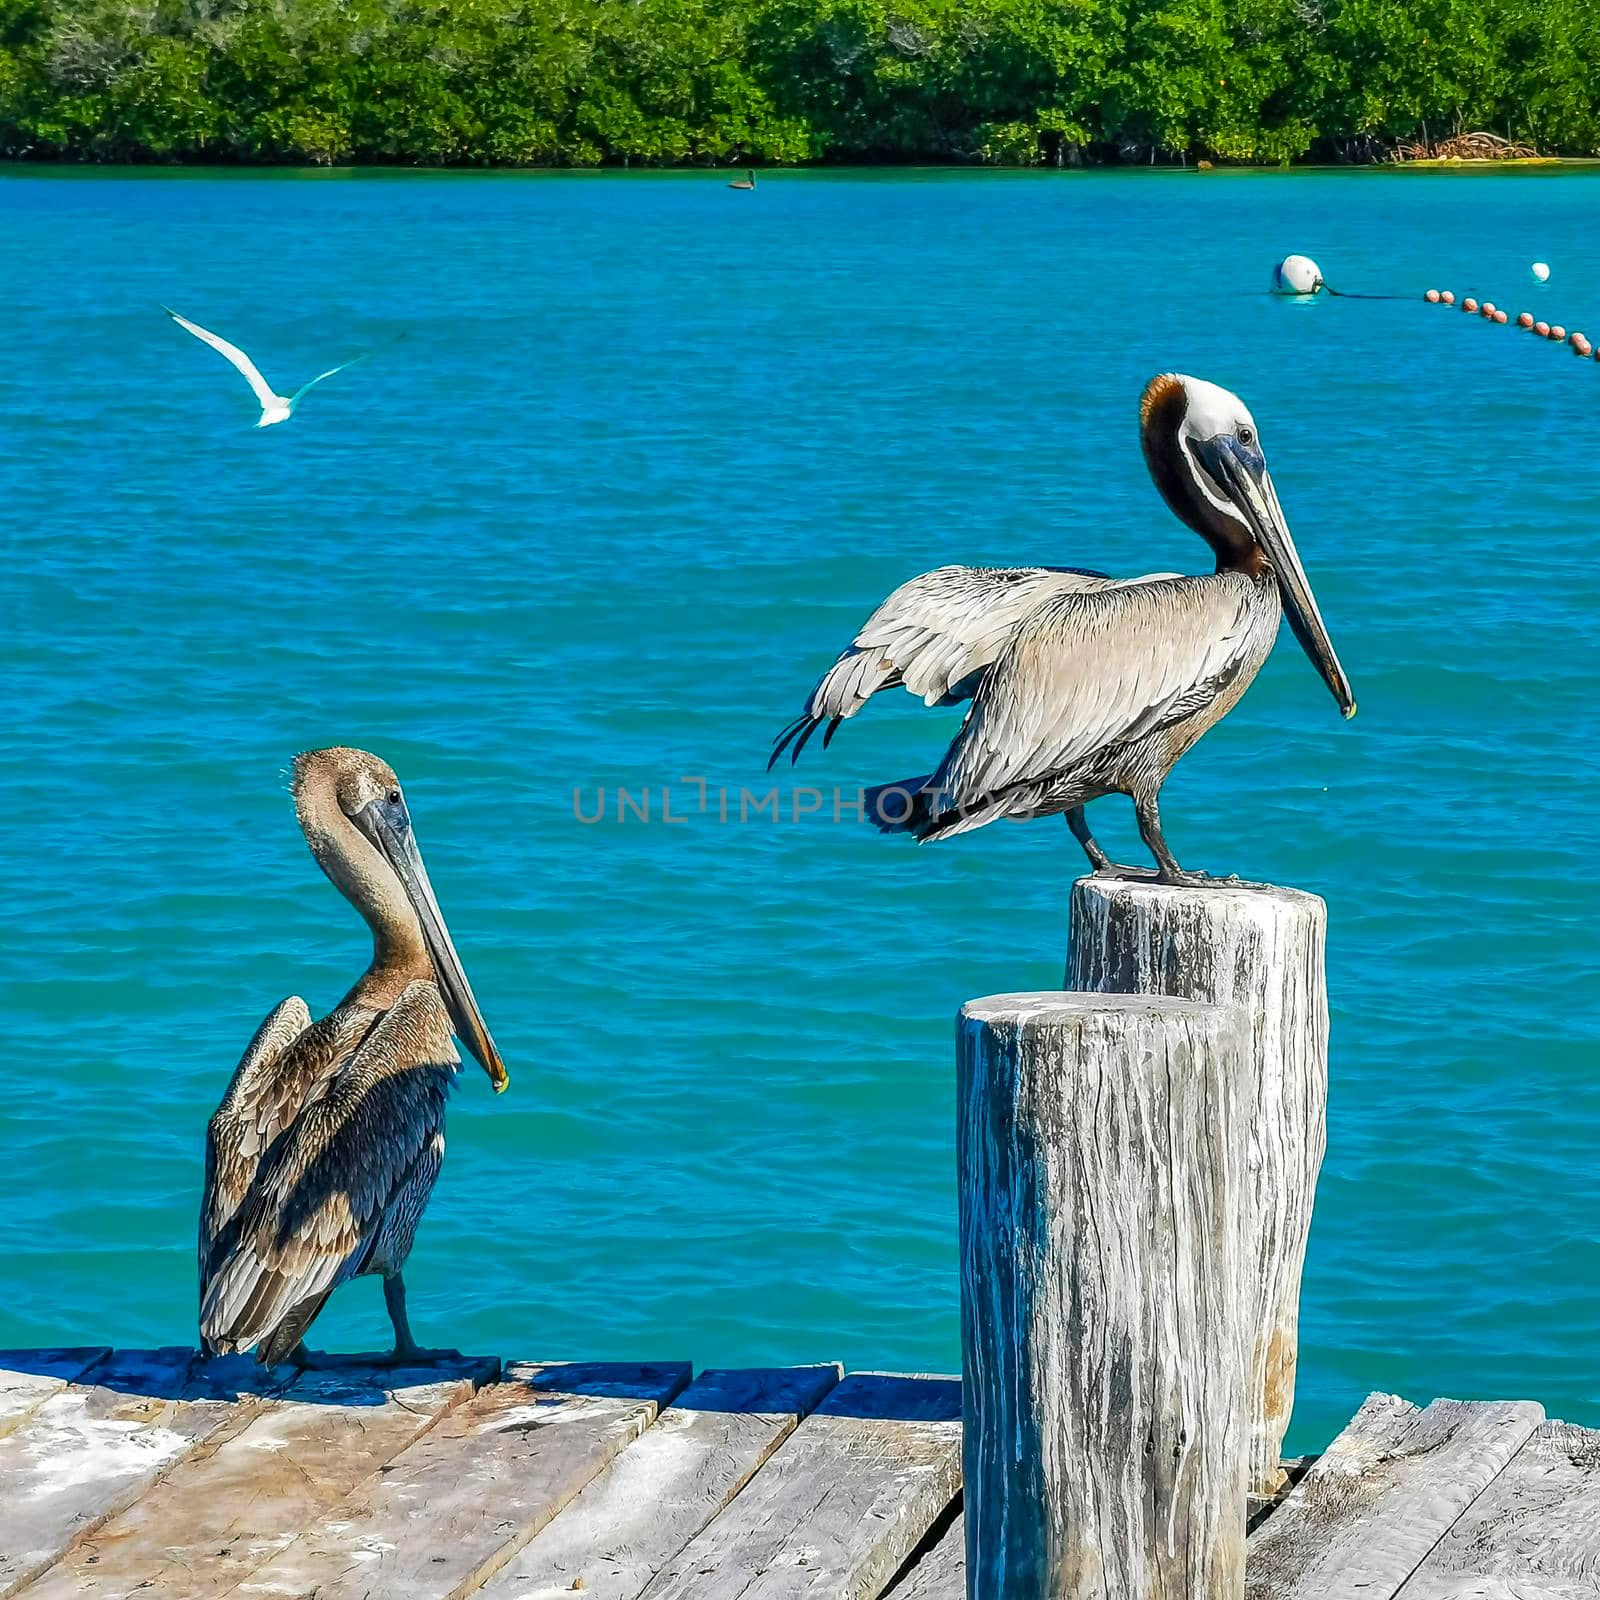 Pelicans pelican and seagulls bird birds on port of the Isla Contoy island harbor with turquoise blue water in Quintana Roo Mexico.